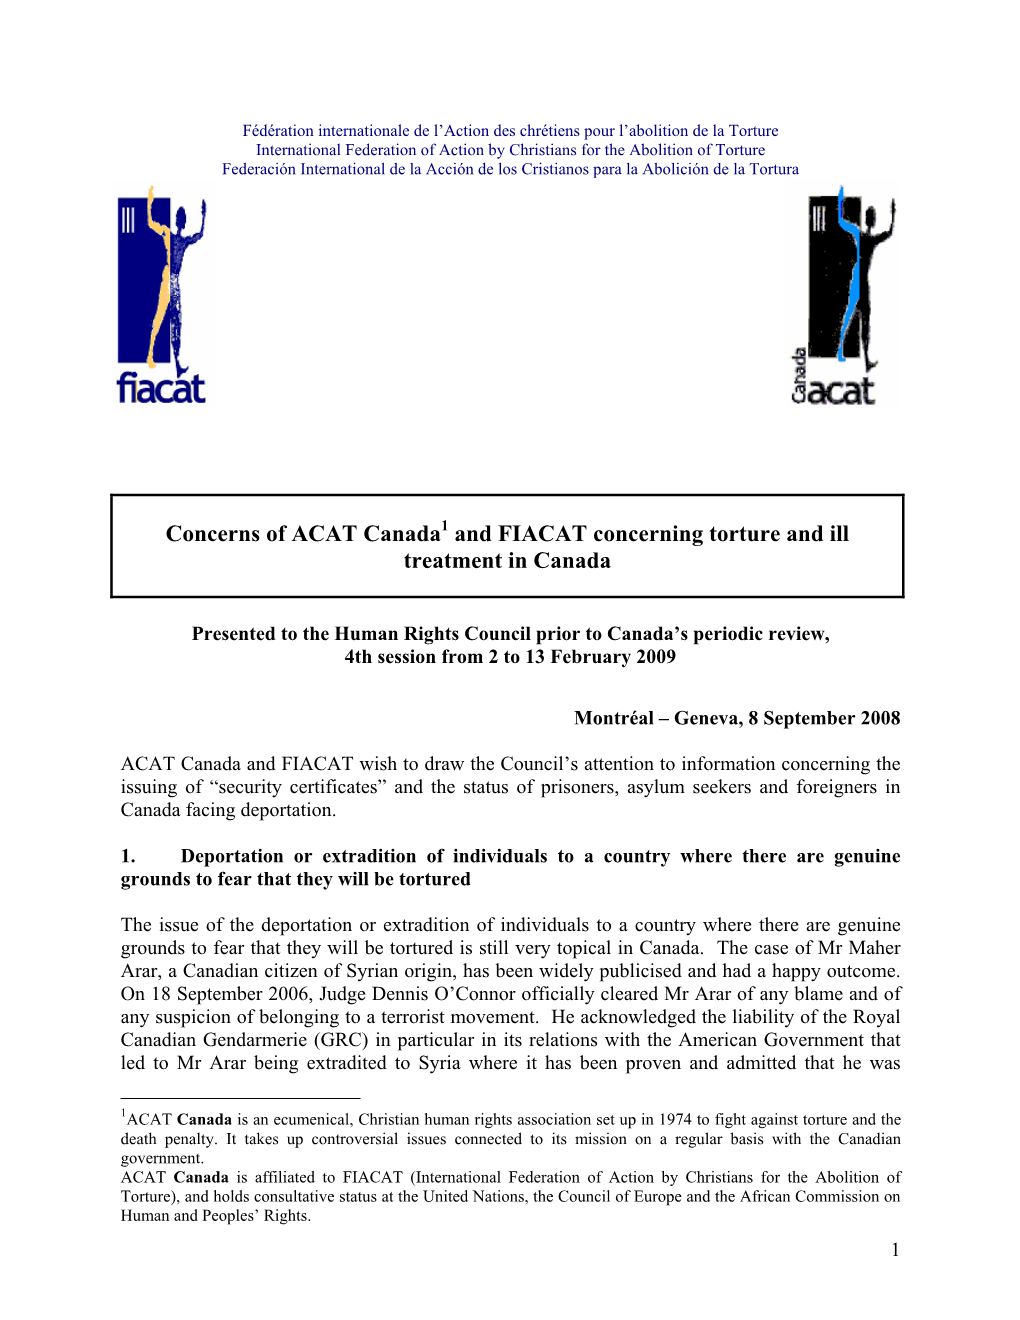 Concerns of ACAT Canada and FIACAT Concerning Torture and Ill